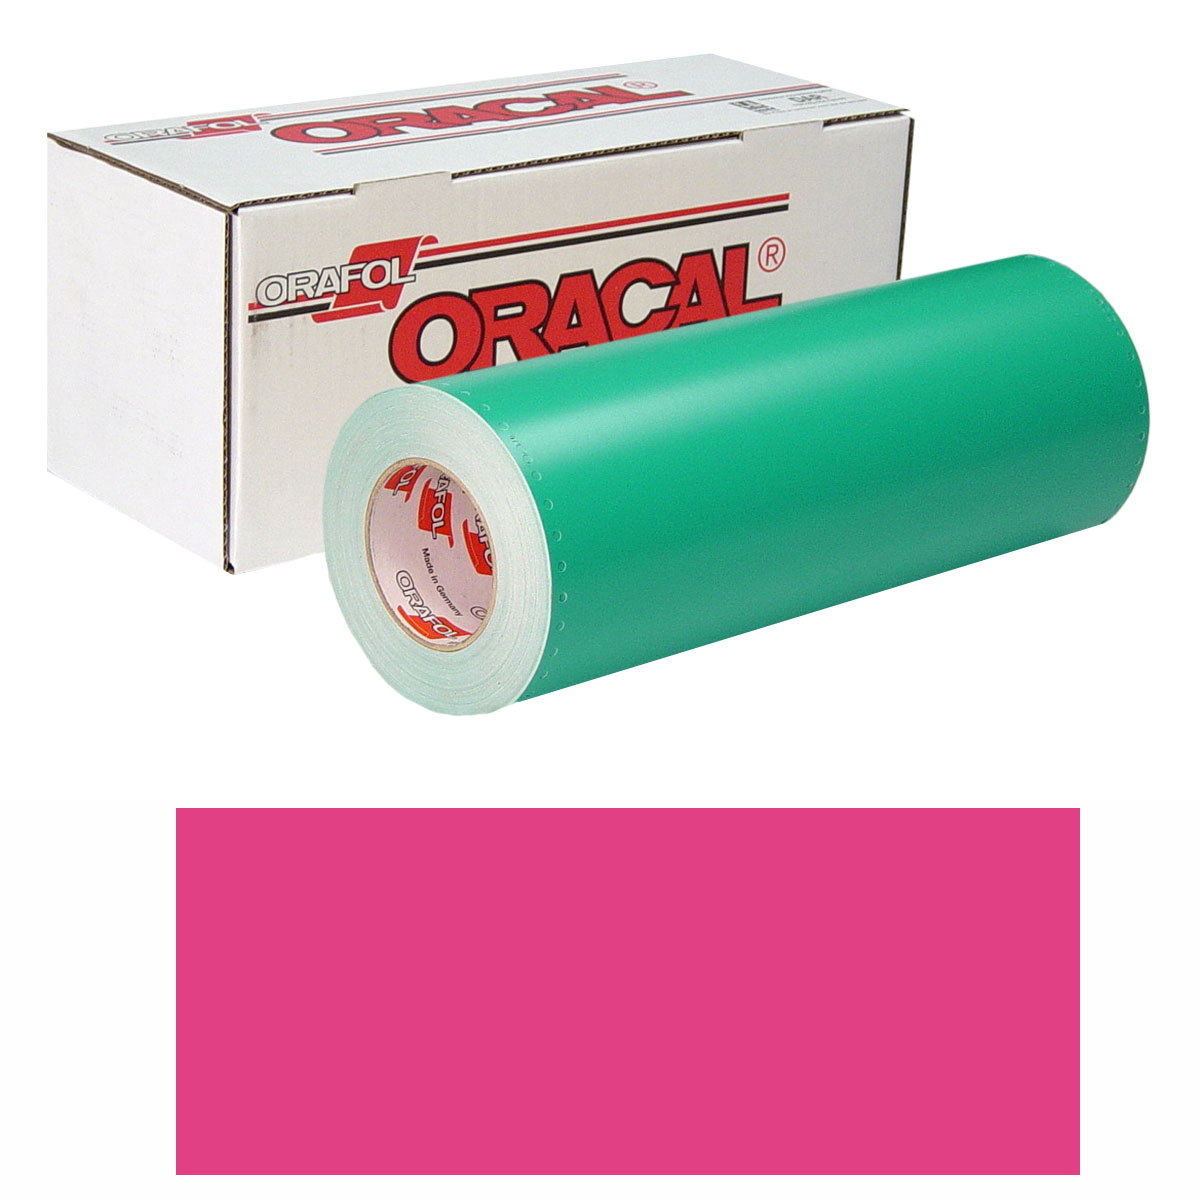 ORACAL 8500 30in X 50yd 041 Pink